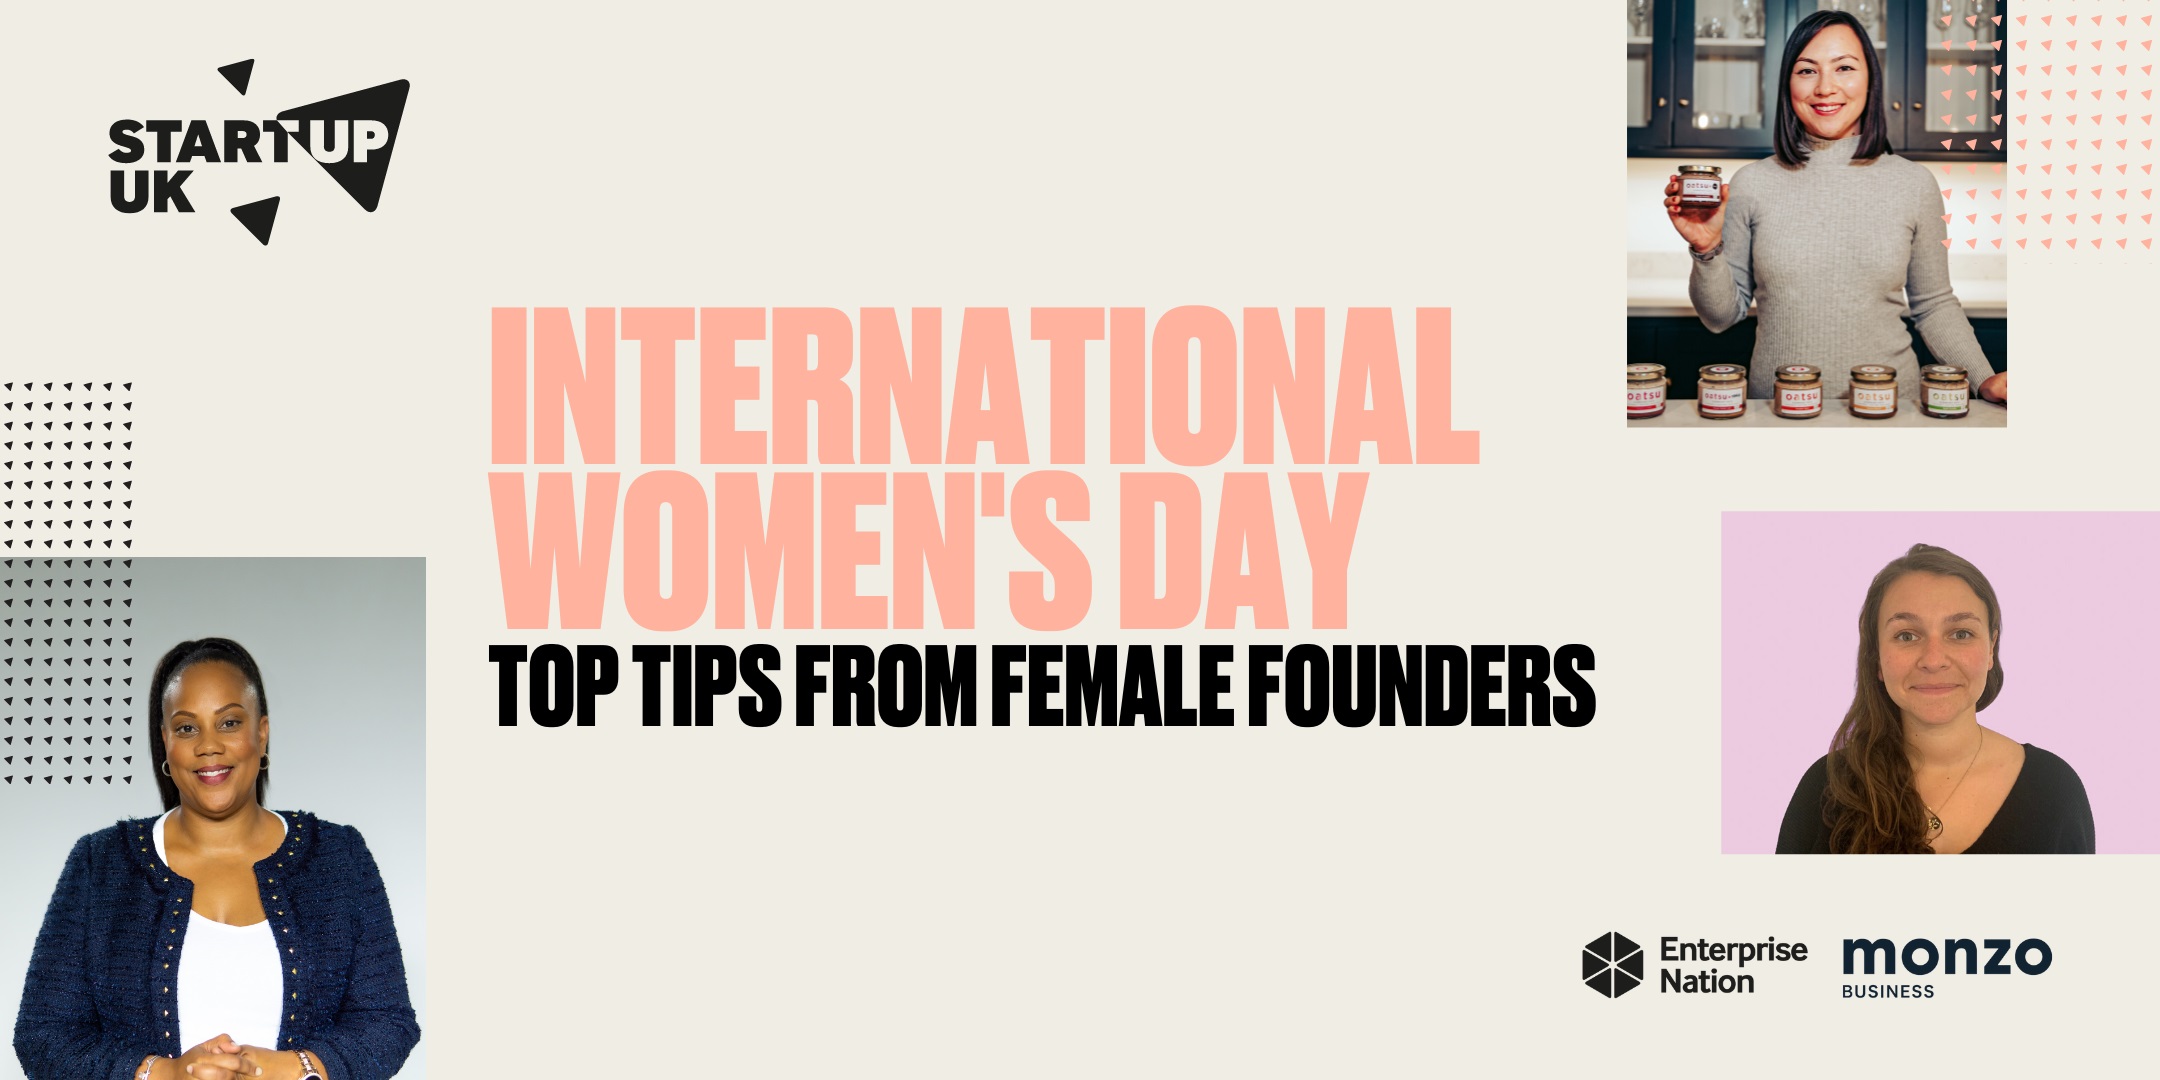 Lunch and Learn: Top tips from female founders